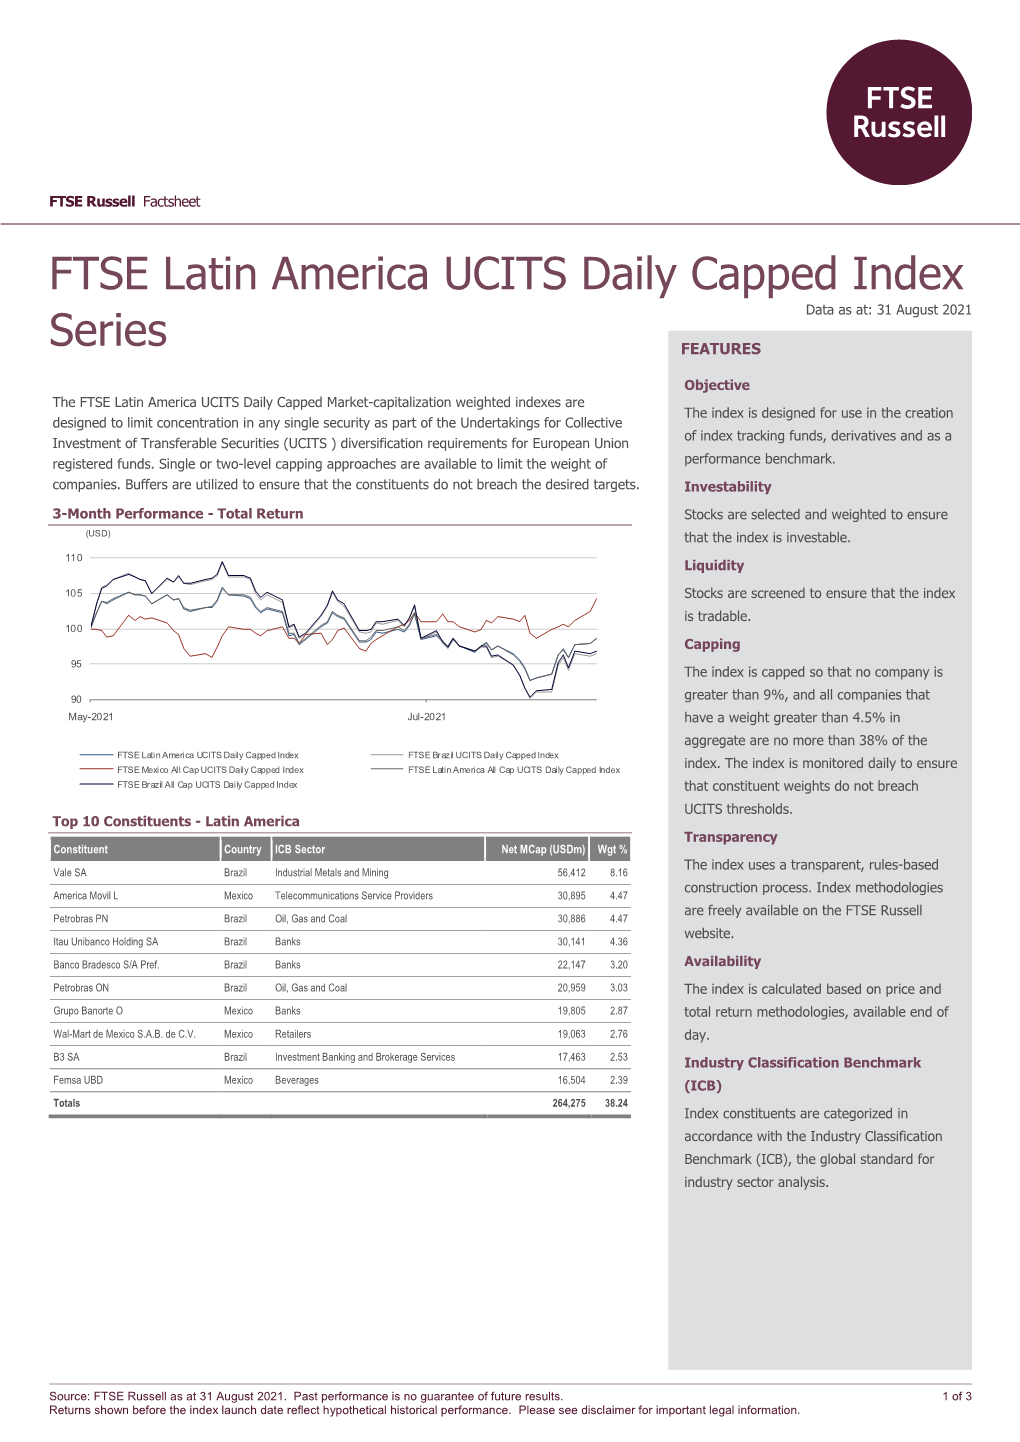 FTSE Latin America UCITS Daily Capped Index Data As At: 31 August 2021